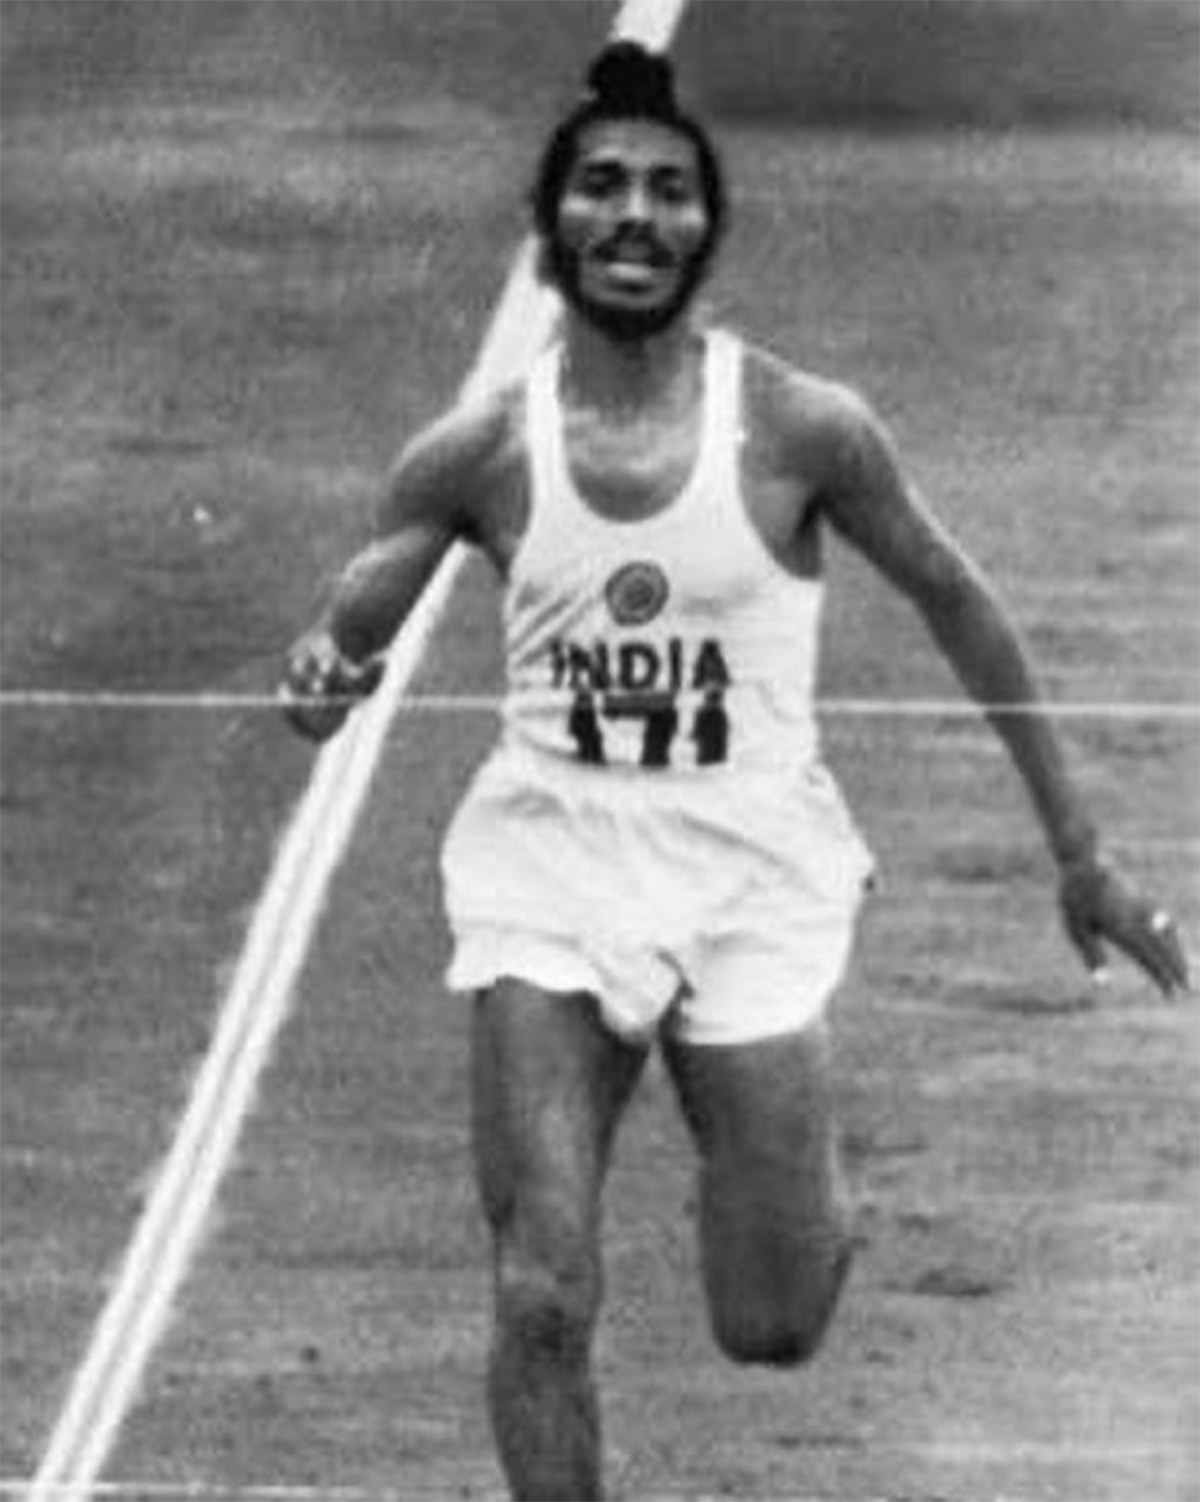 Milkha Singh remained tormented by missing that bronze at the 1960 Rome Olympics, one of the only two incidents in his life, which he described as unforgettable -- the other being the killing of his parents in front of him in Pakistan during partition.